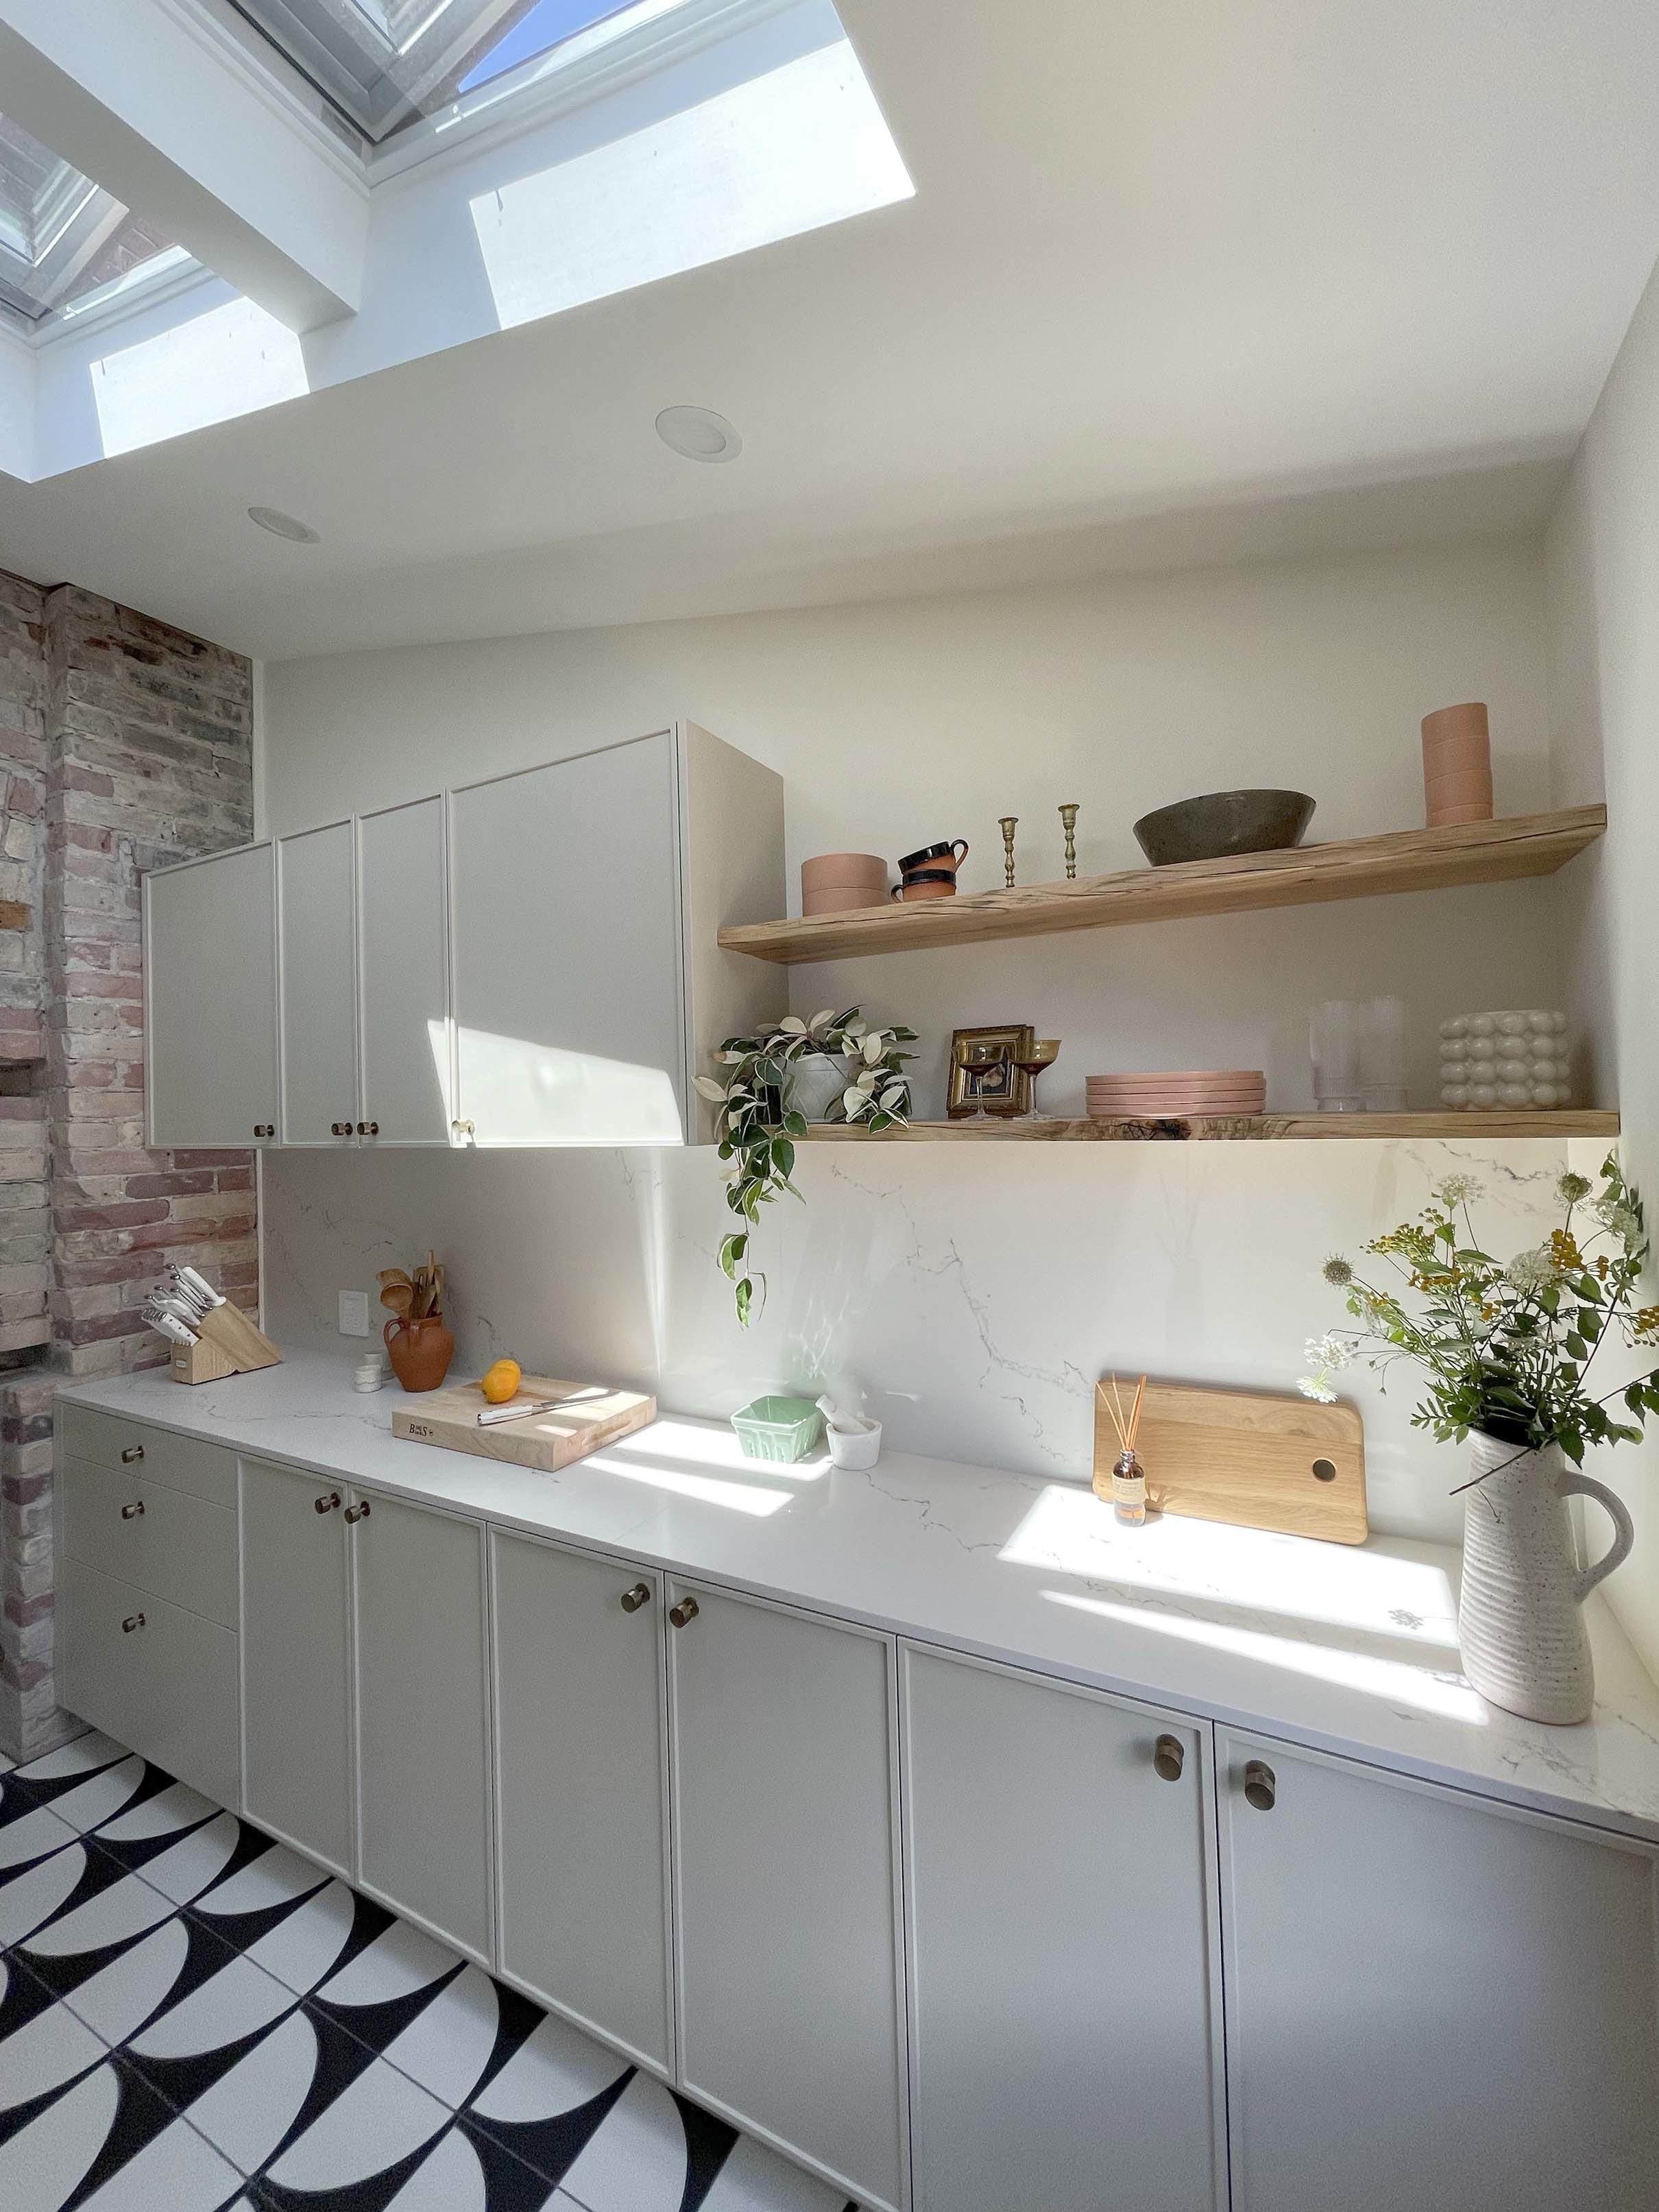 Kitchen skylights gray cabinets white countertop plants